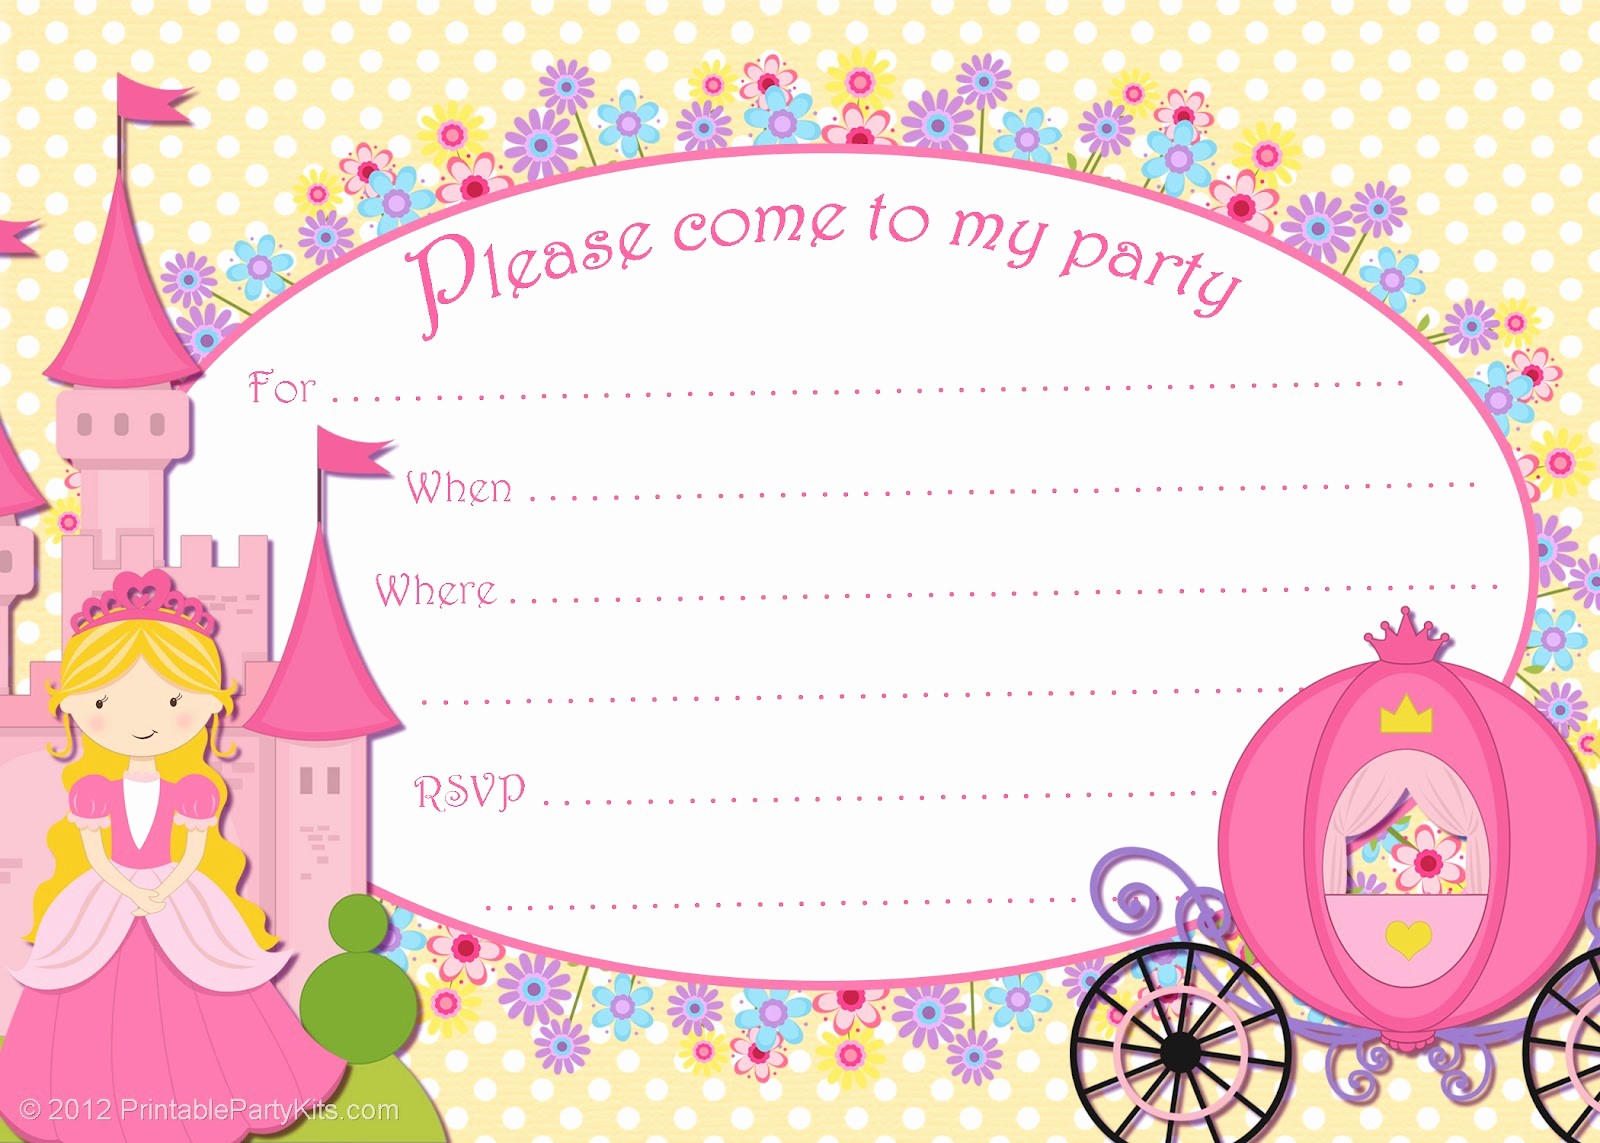 Free Printable Party Invitations Templates Elegant Free Printable Party Invitations Free Printable